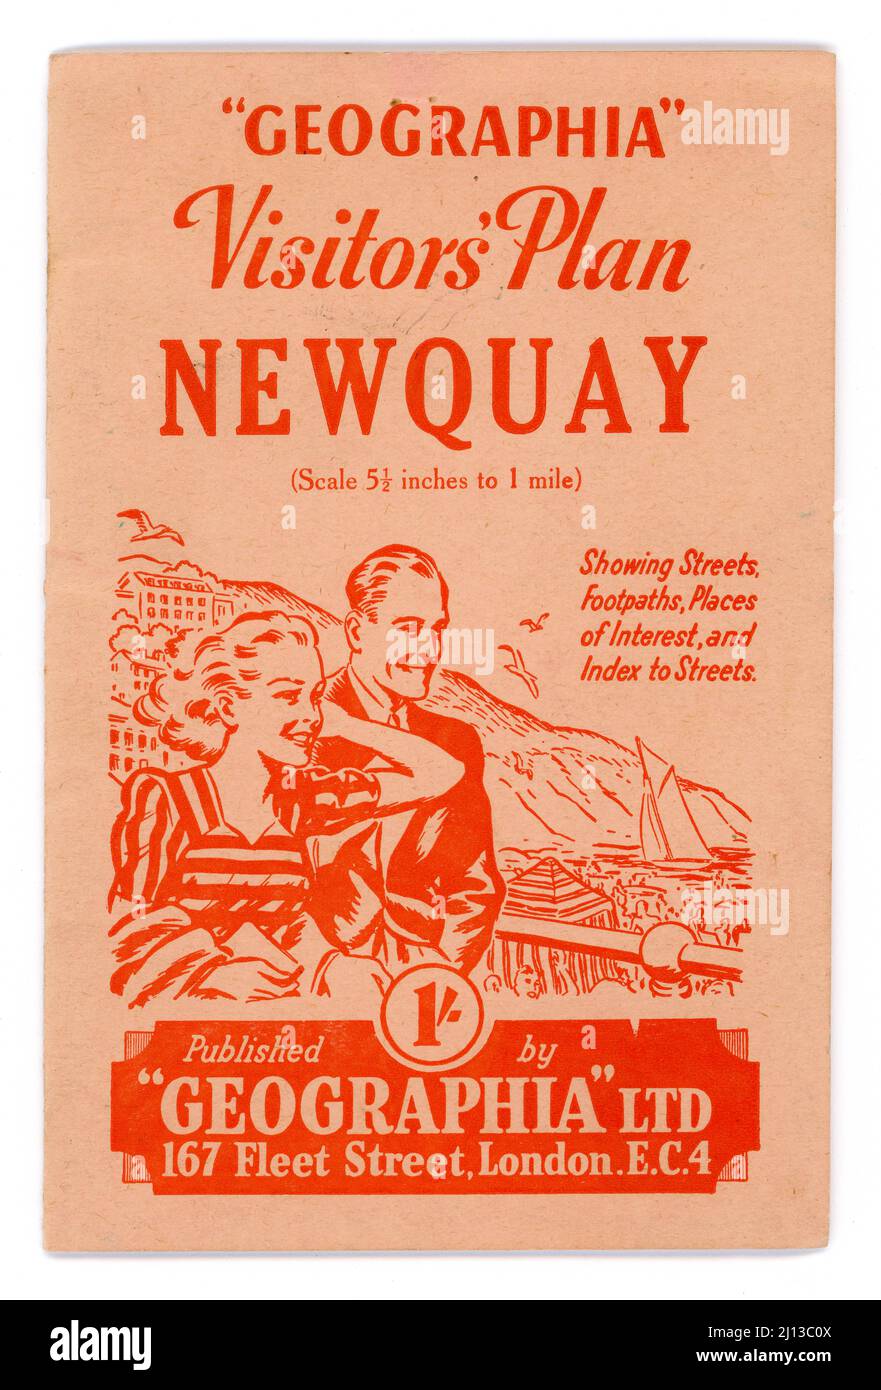 Original retro 1940's Geographia series tourist guide - Visitors Plan Newquay. Town plan. Published by Geographia Ltd. 167 Fleet Street, London, EC4. The illustration shows a happy couple out enjoying themselves in Newquay, Cornwall, U.K. circa 1945 / 1946 Stock Photo